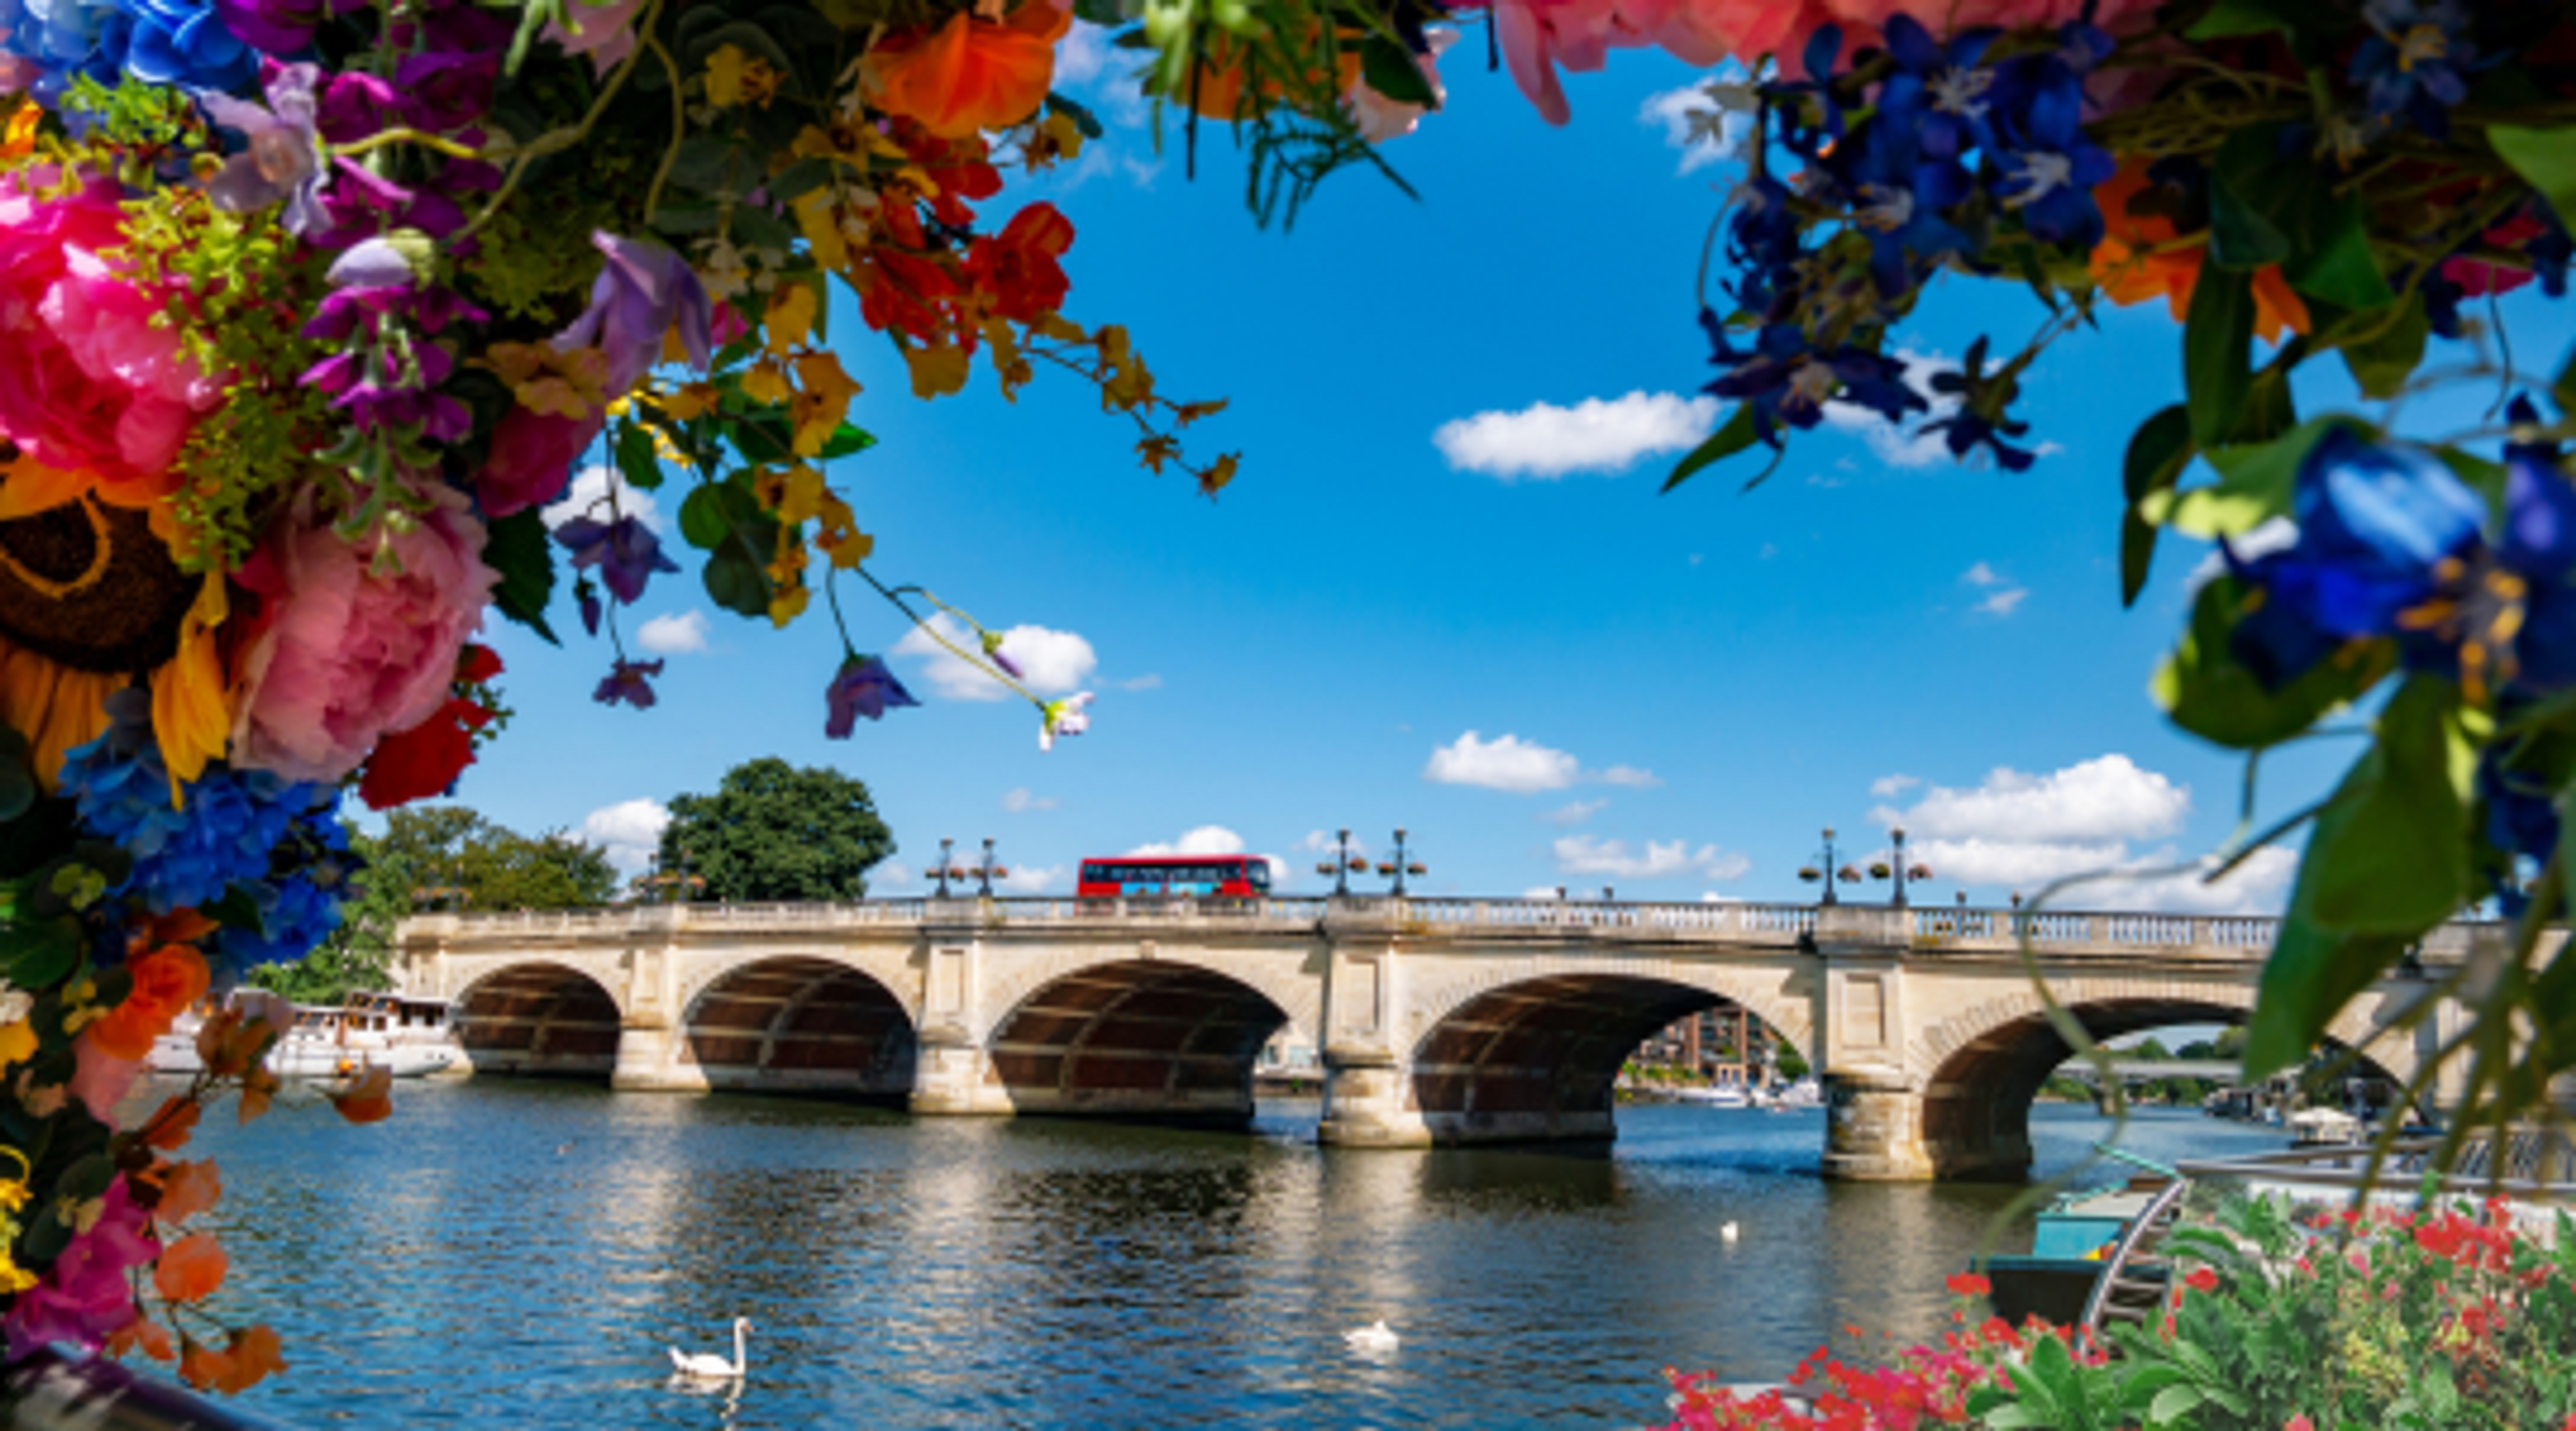 A stunning summer view of Kinston Bridge, located a short walk away from our London Kingston Summer School